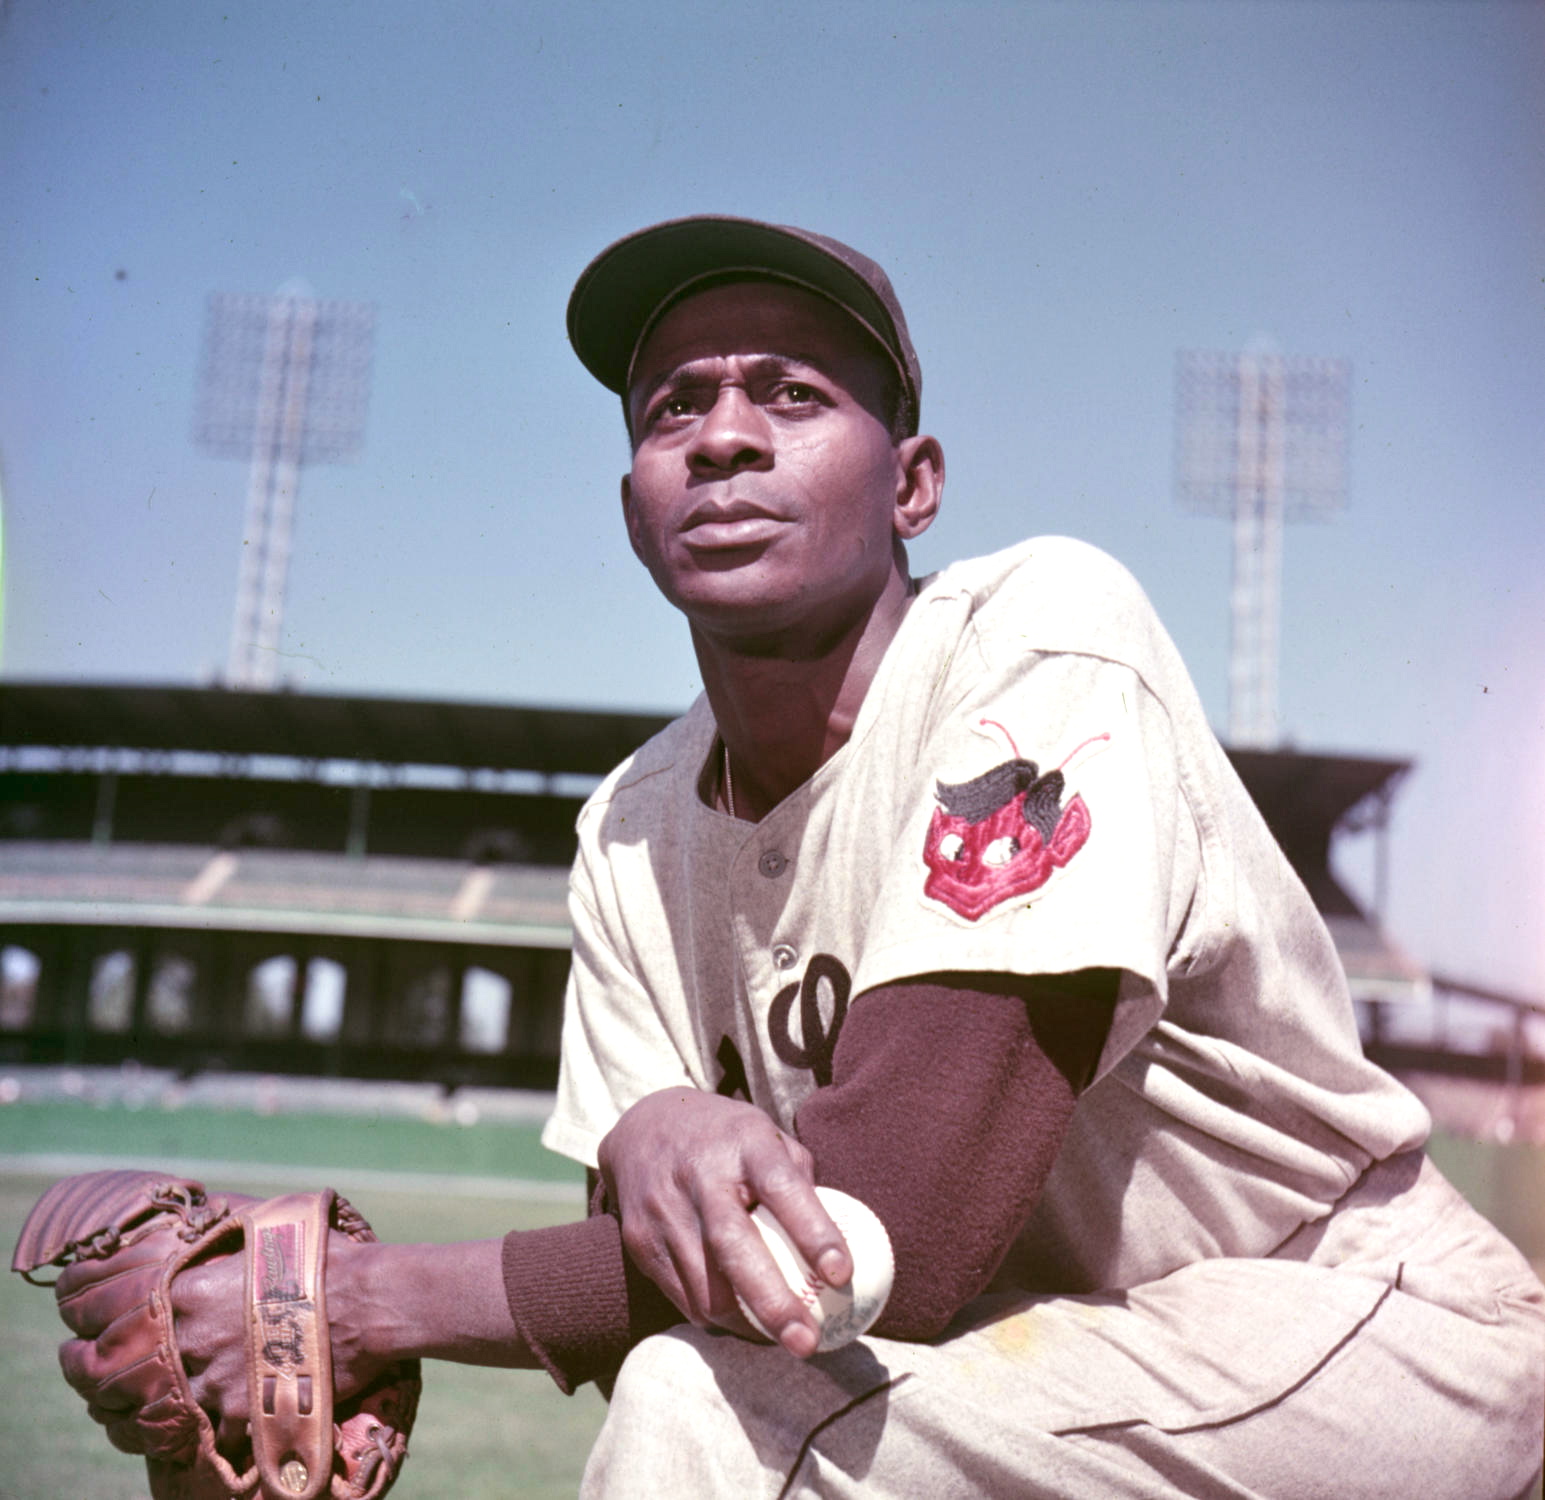 Satchel Paige of the St. Louis Browns, October 1, 1952.